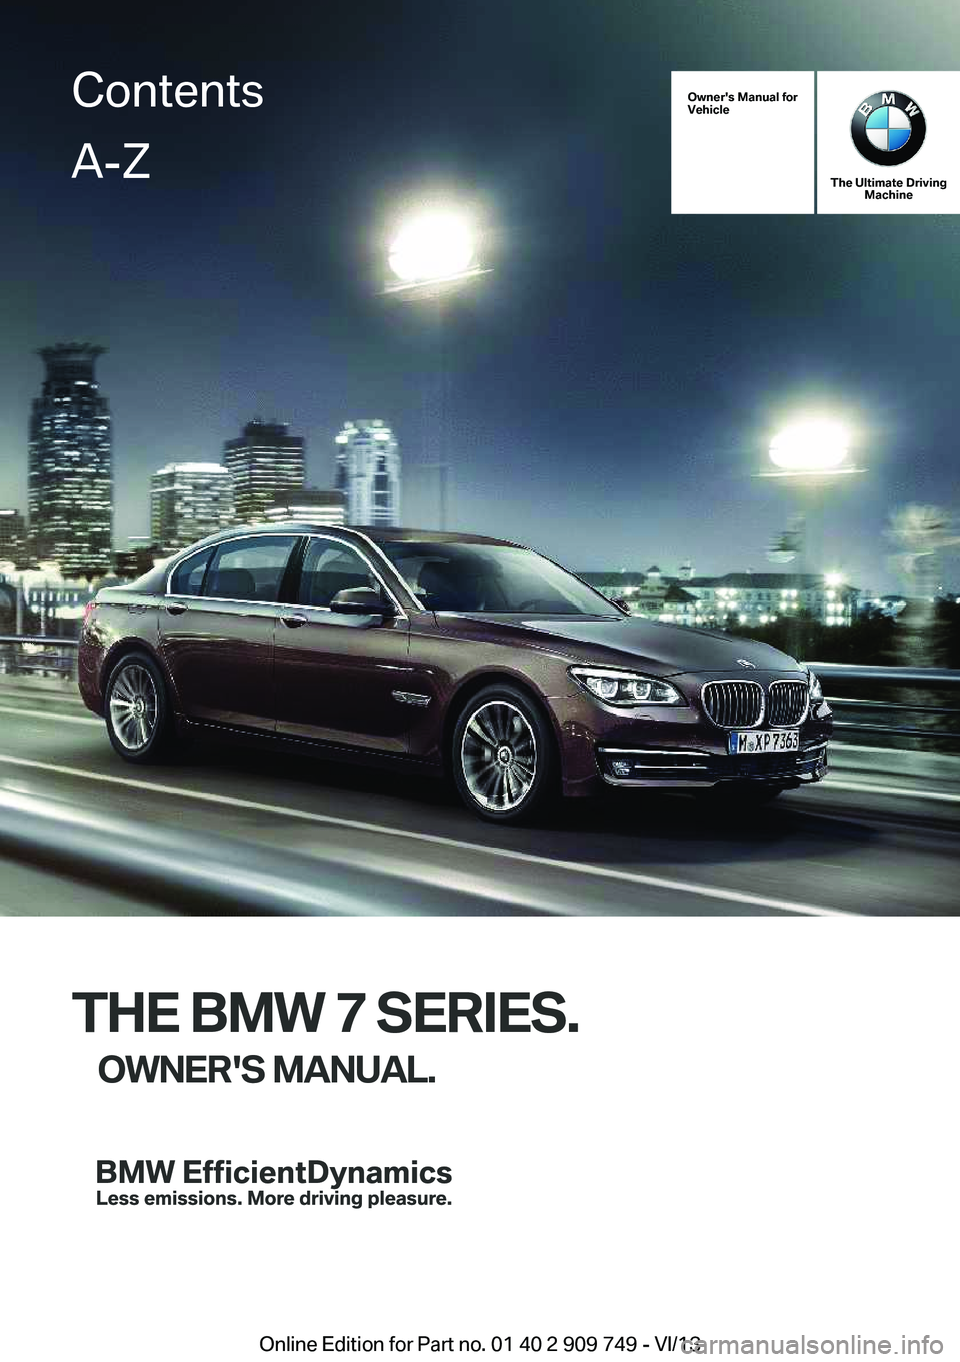 BMW 750I XDRIVE 2014  Owners Manual Owner's Manual for
Vehicle
The Ultimate Driving Machine
THE BMW 7 SERIES.
OWNER'S MANUAL.
ContentsA-Z
Online Edition for Part no. 01 40 2 909 749 - VI/13   